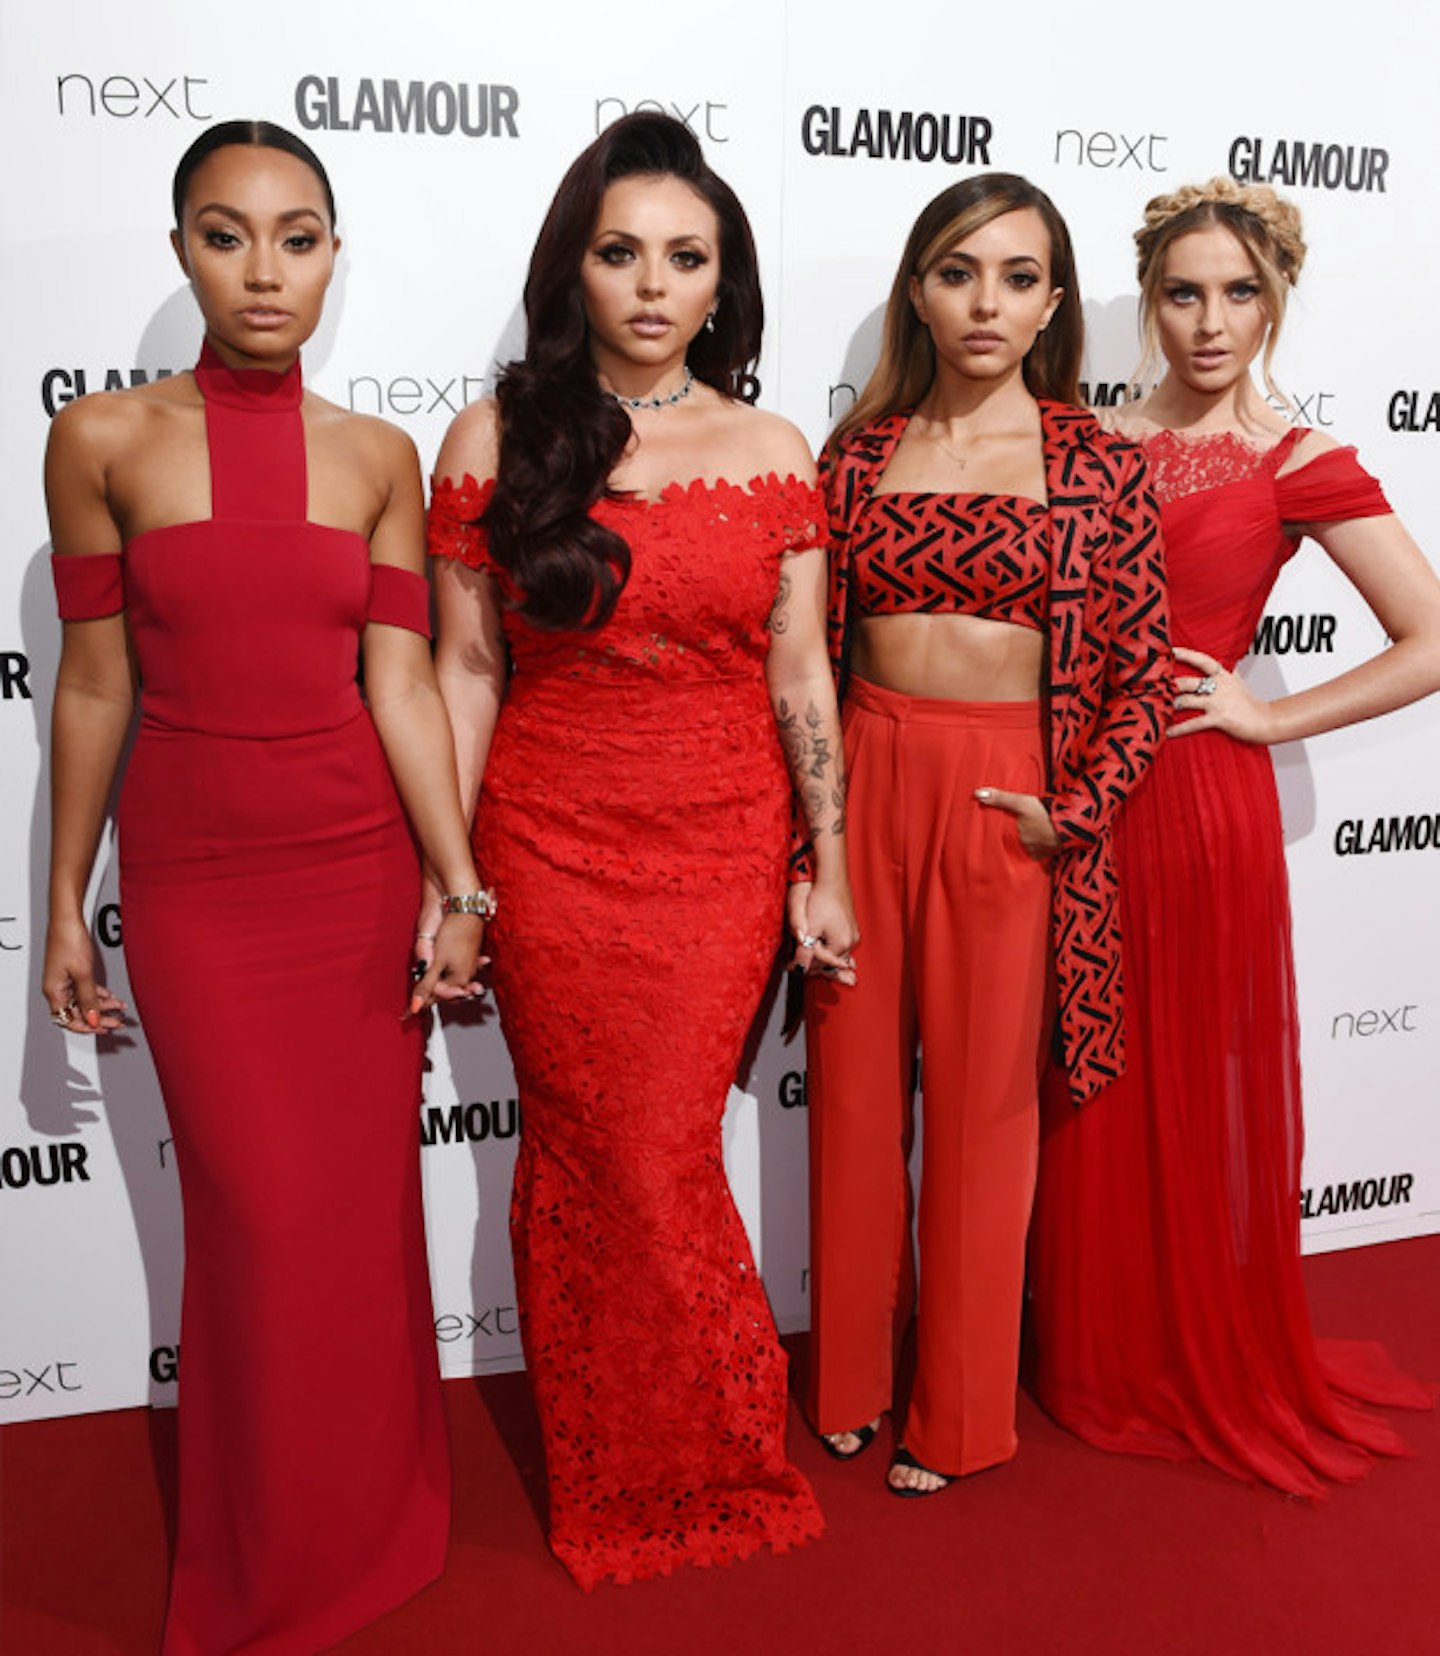 glamour-awards-outfits-little-mix-red-dresses